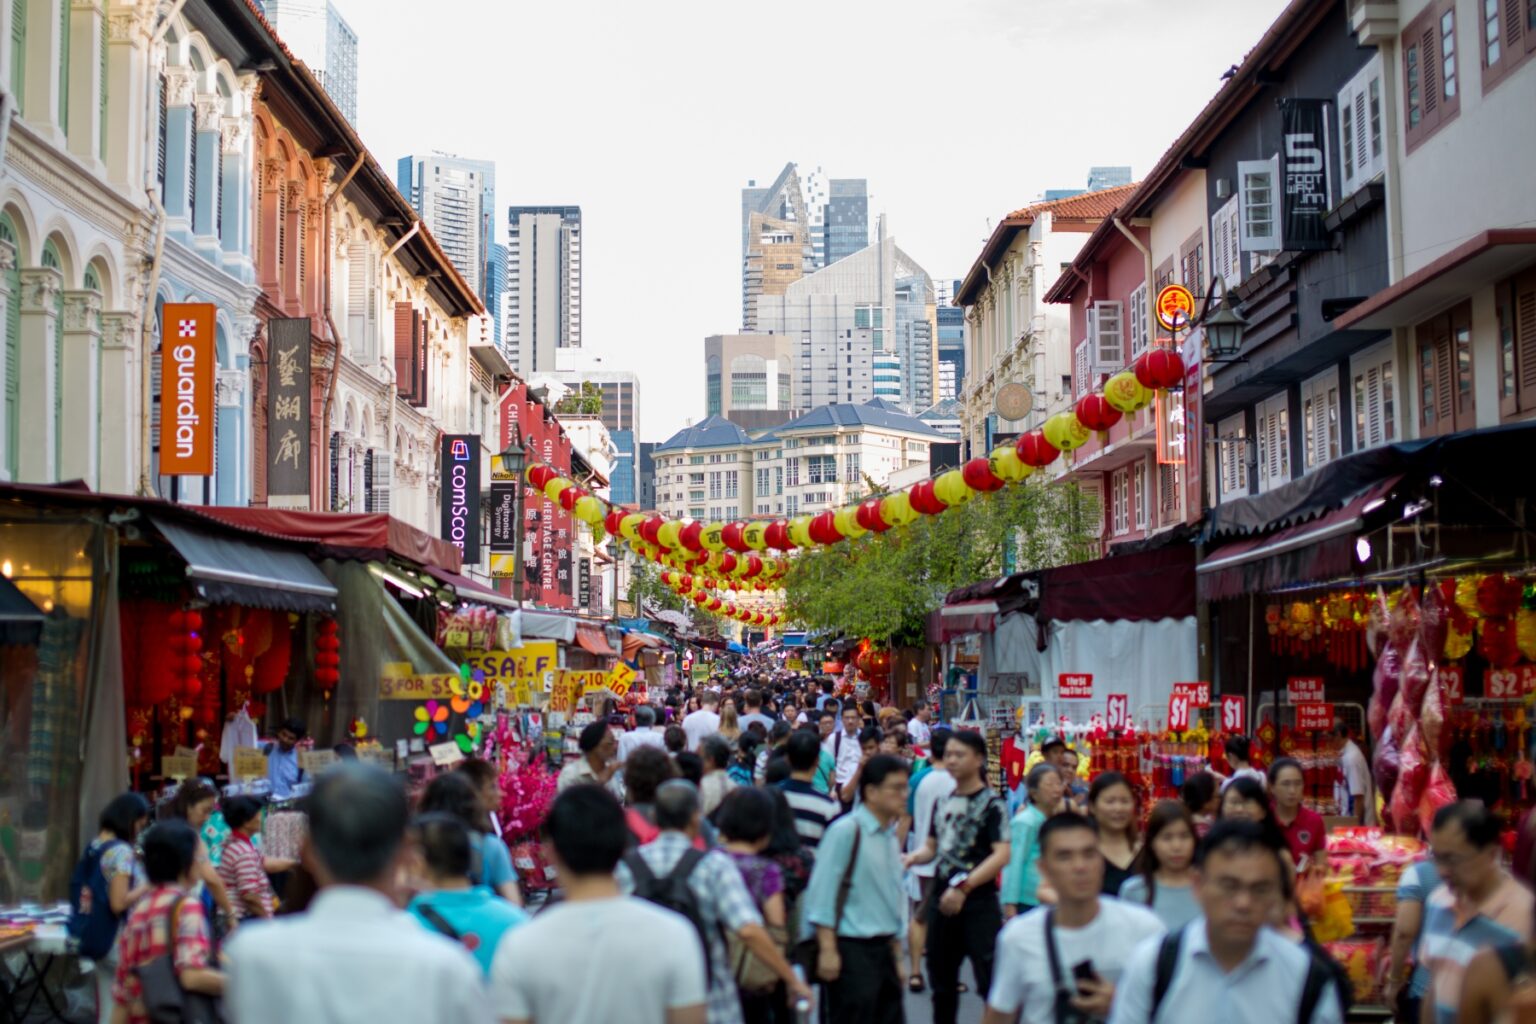 Crowds of people walk down a street lined with Chinese New Year decorations and stalls